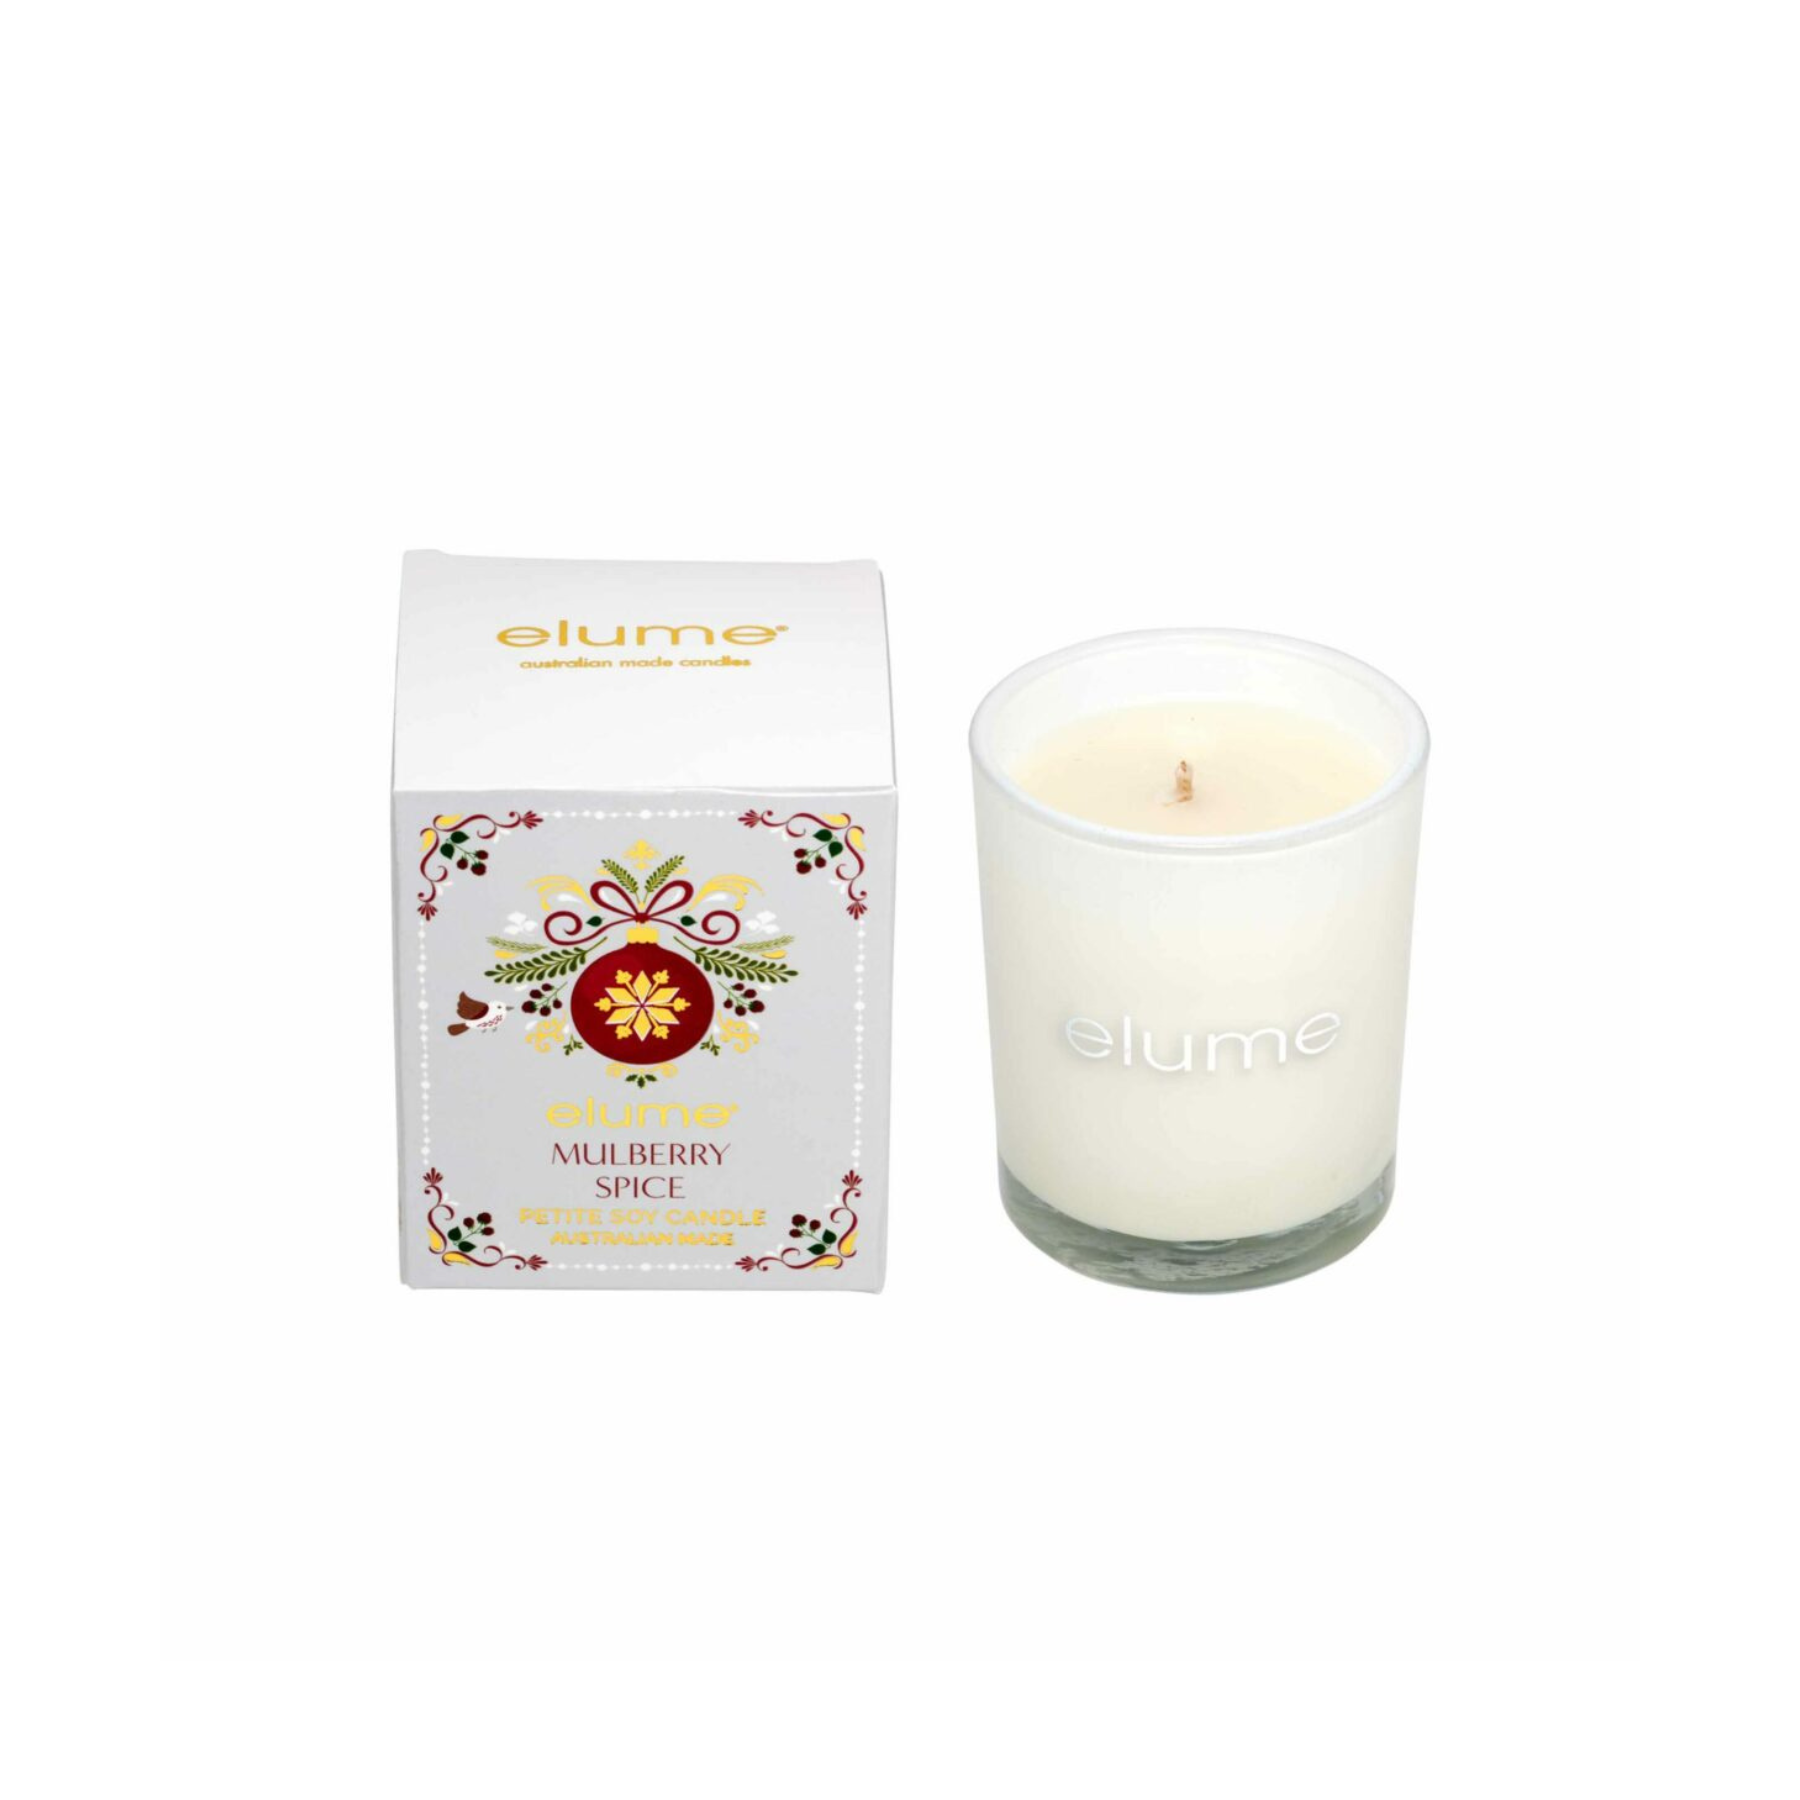 Elume Christmas Elegant Mulberry Spice Soy Candles